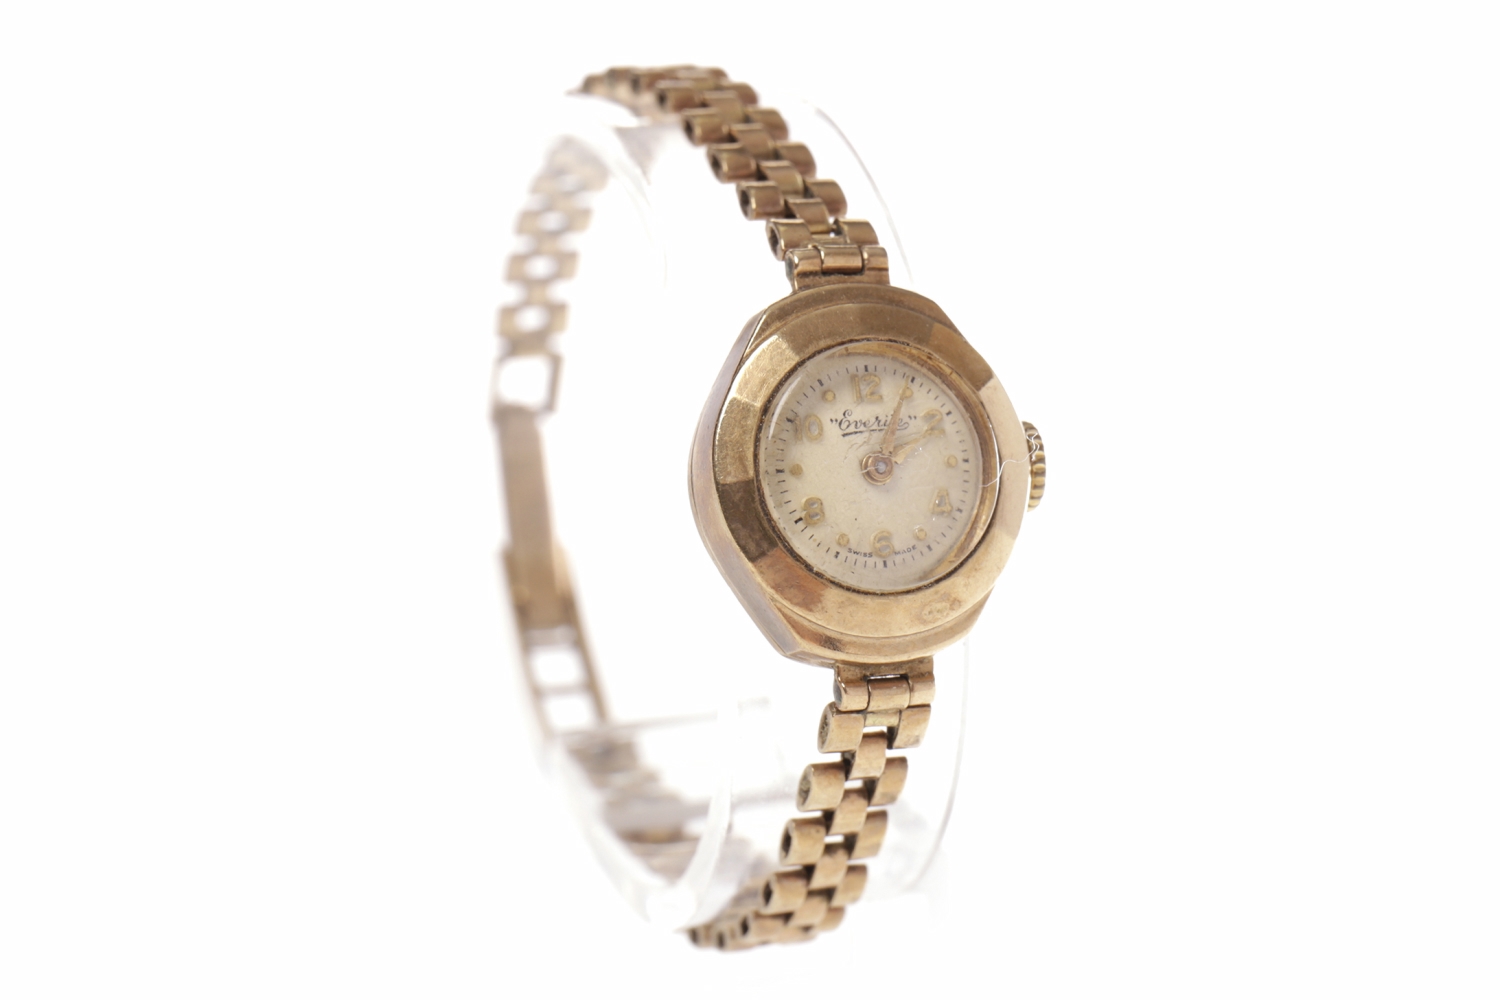 LADY'S NINE CARAT GOLD MANUAL WIND EVERITE WRISTWATCH the round white dial with applied gold